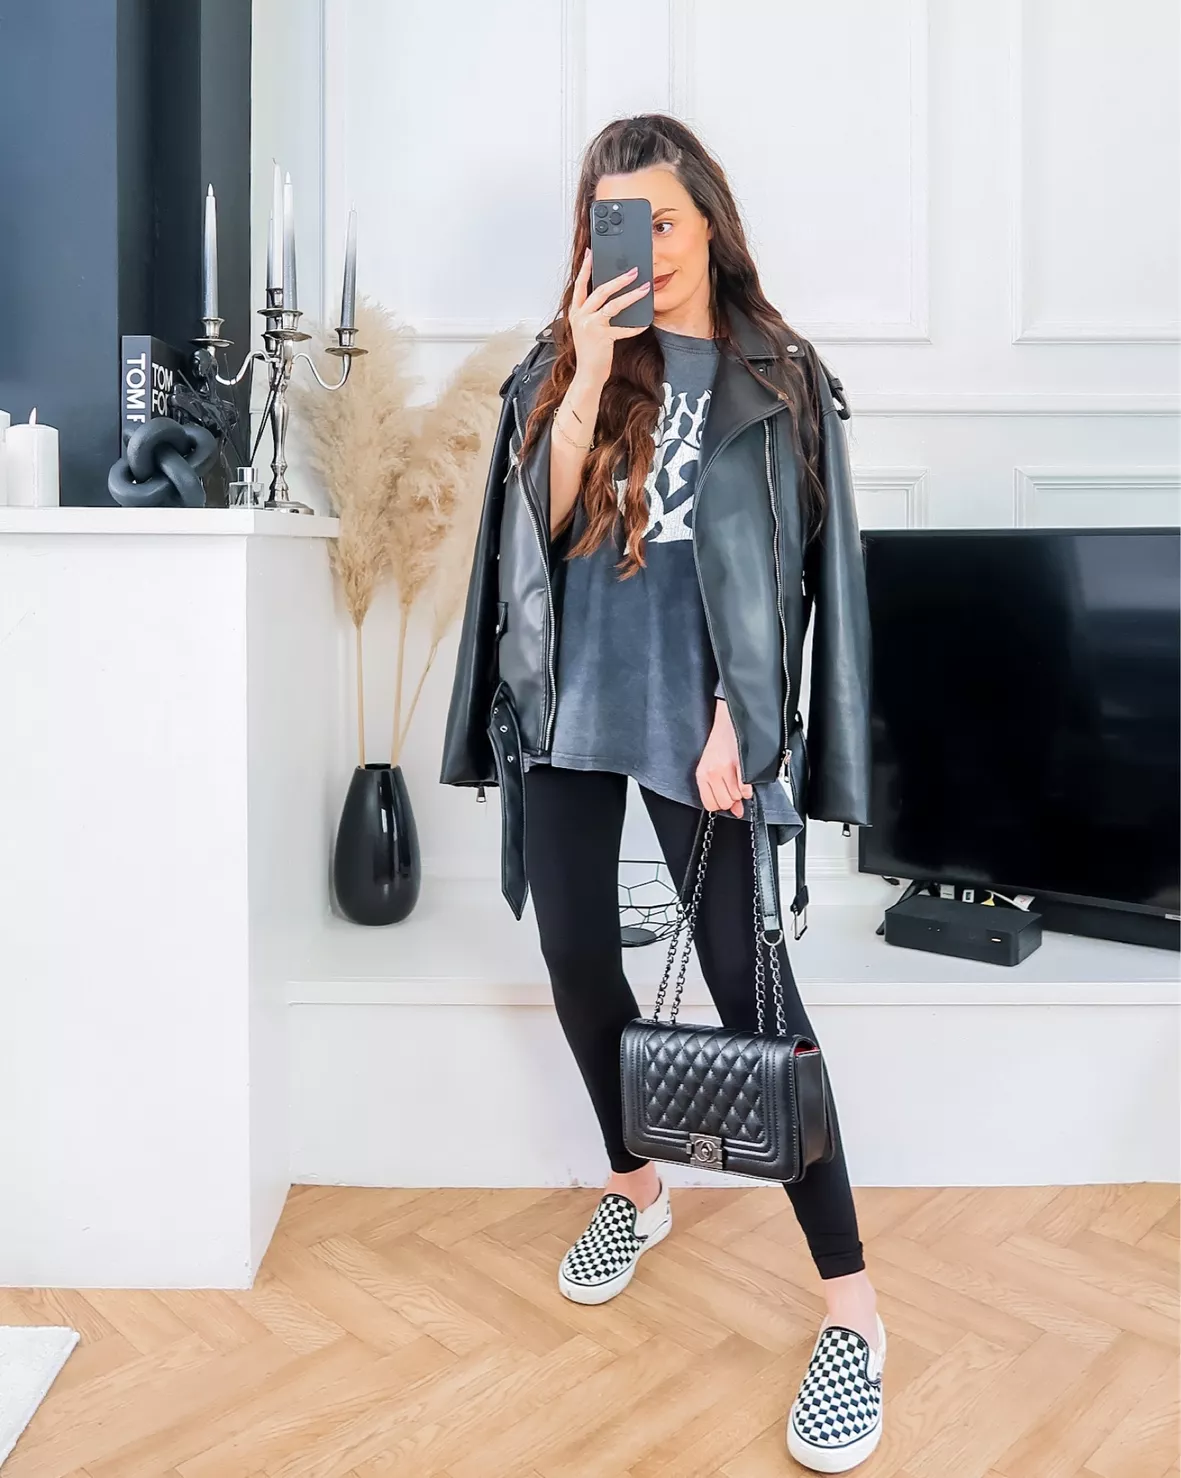 IN THE STYLE LORNA LUXE BLACK 'CONTOUR' LEATHER LOOK LEGGINGS PLUS UK 24.  RP £30